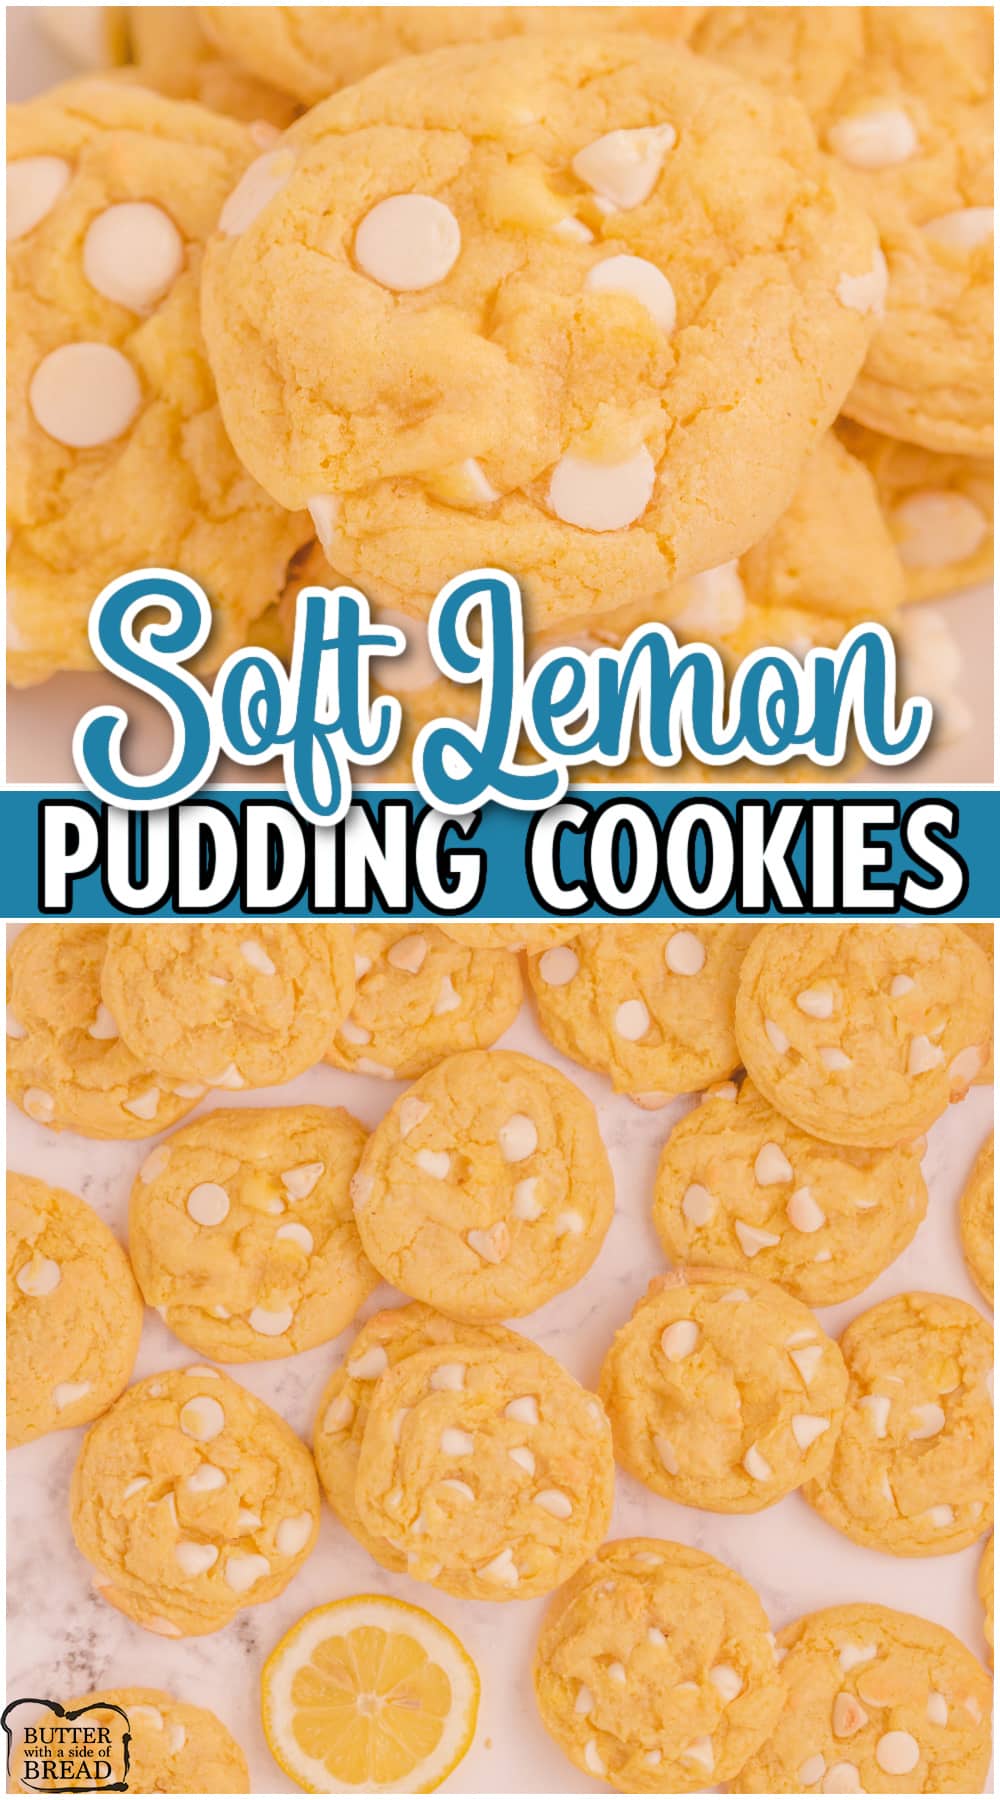 Lemon Pudding Cookies are soft, chewy, & perfectly sweet with delightful lemon flavor! Lemon pudding adds a nice twist of flavor & texture to these lemon cookies with white chocolate.